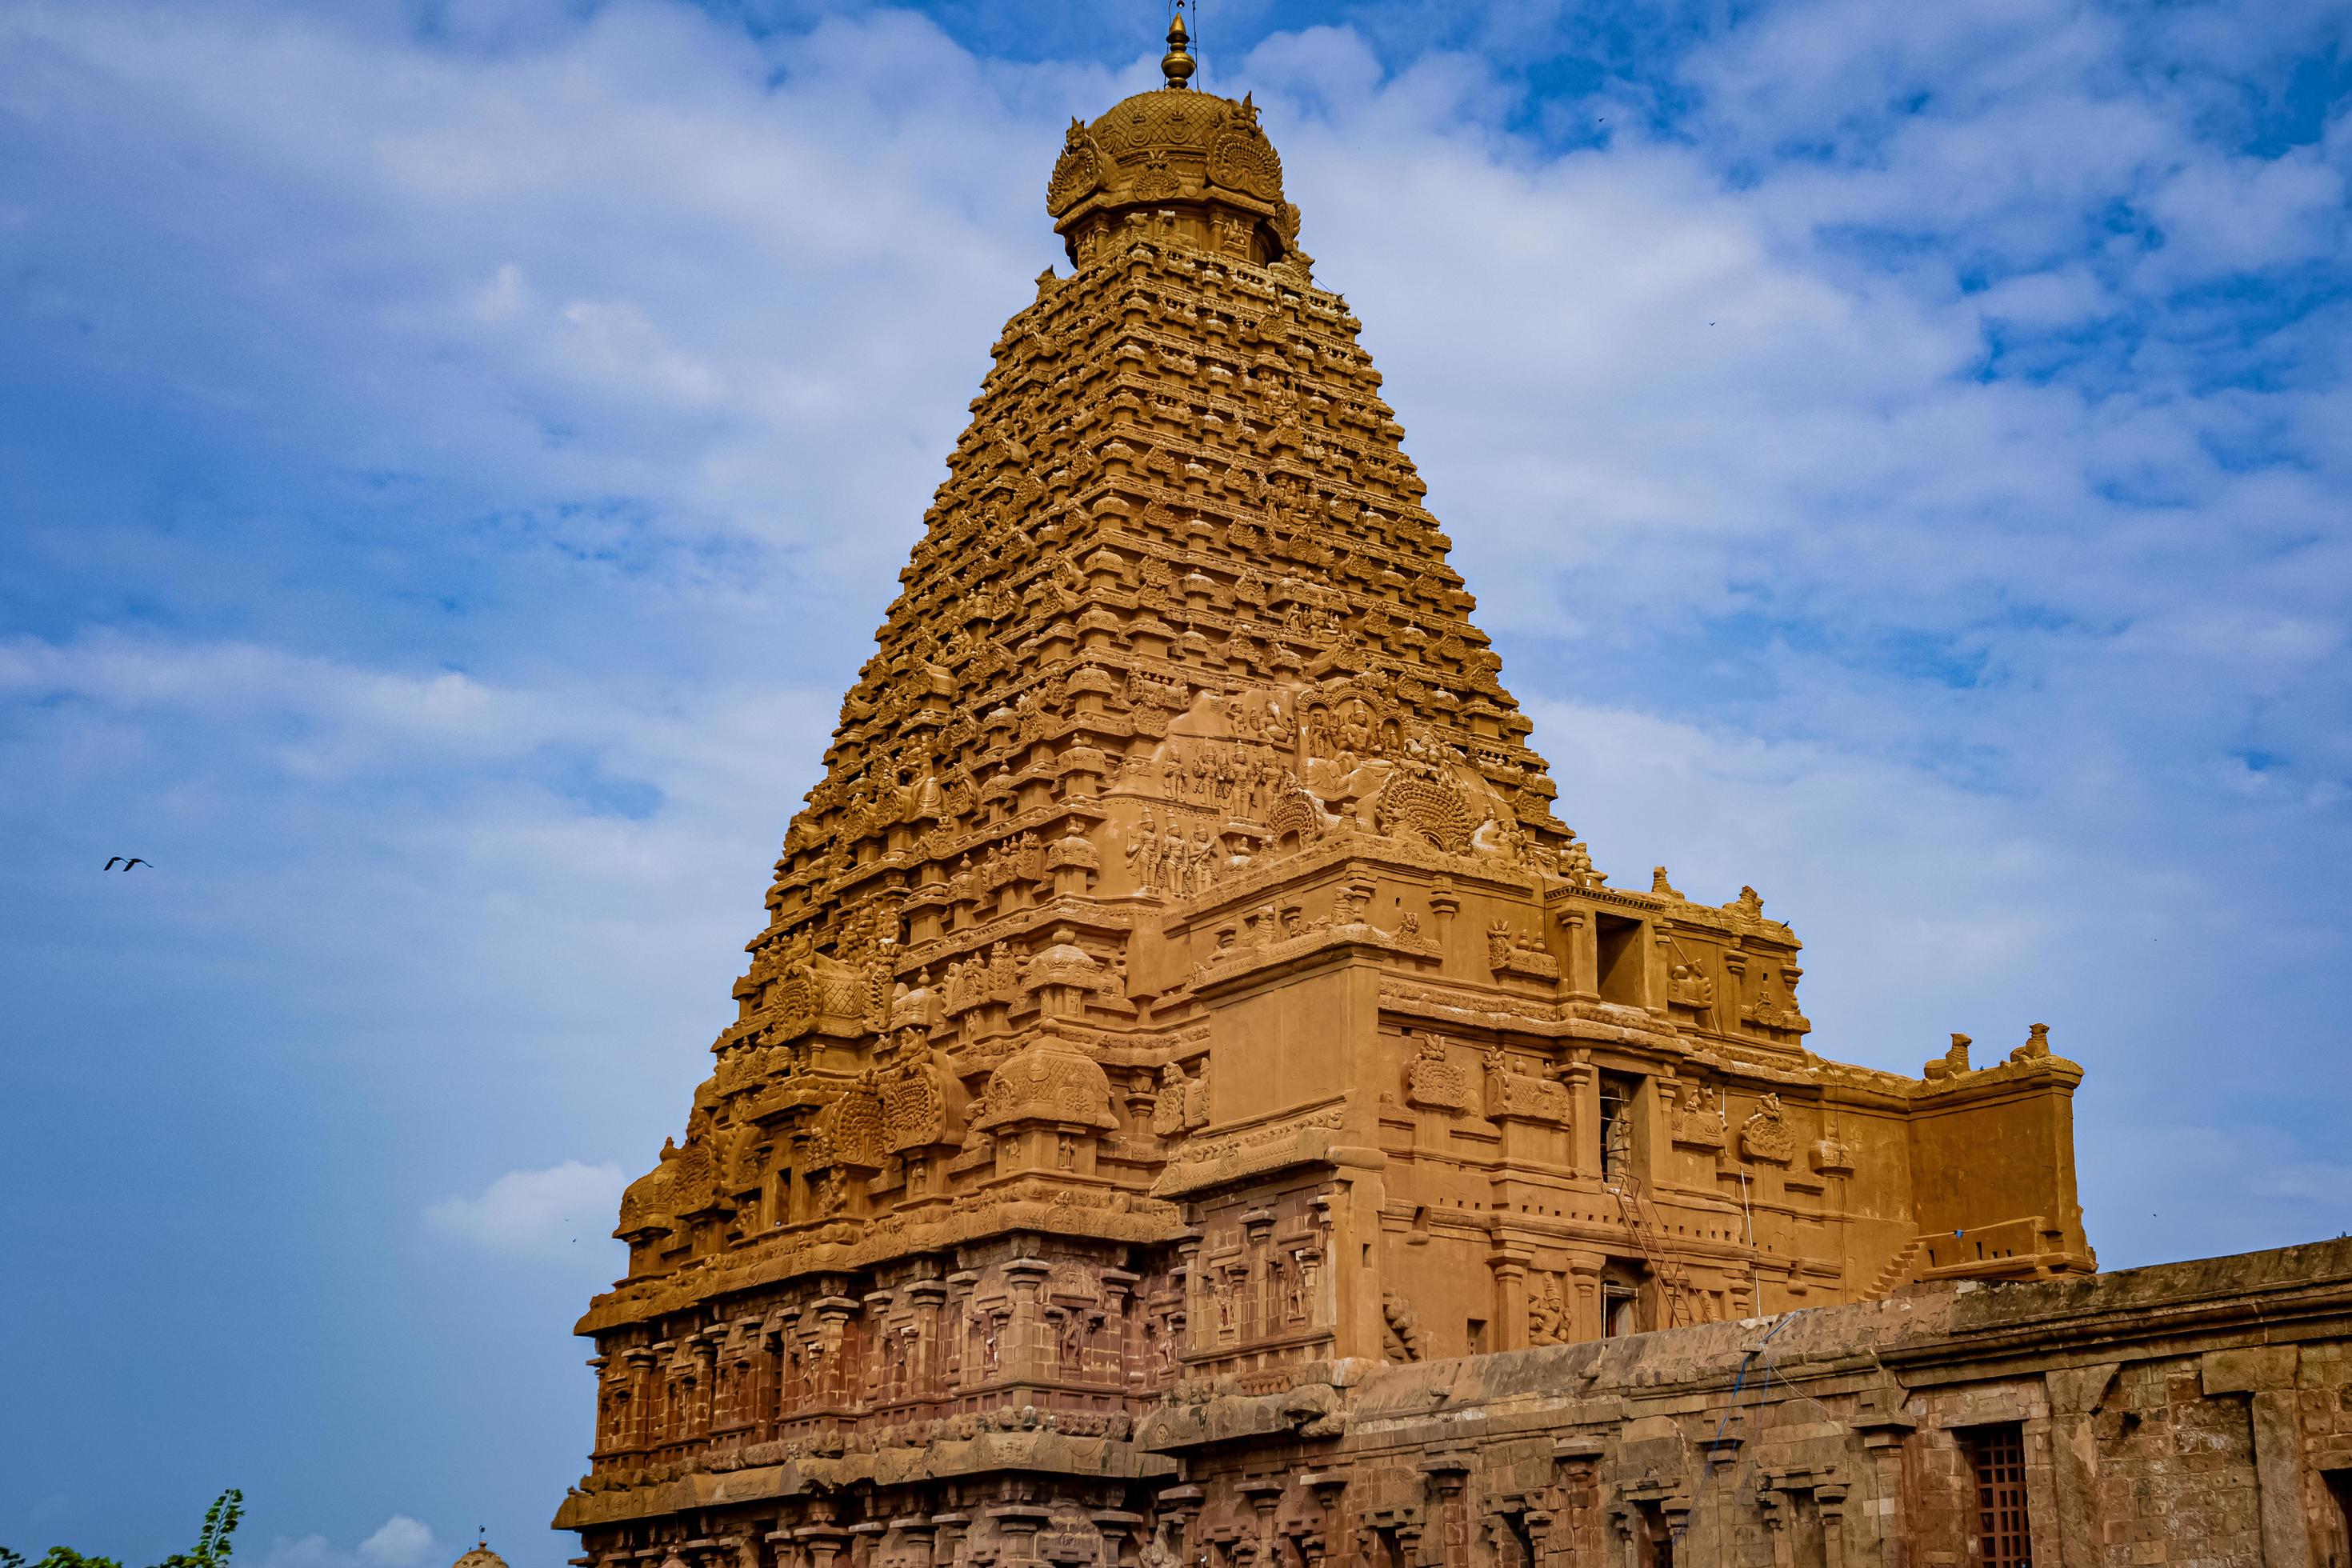 Tanjore Big Temple or Brihadeshwara Temple was built by King Raja Raja  Cholan in Thanjavur, Tamil Nadu. It is the very oldest and tallest temple  in India. This temple listed in UNESCO's